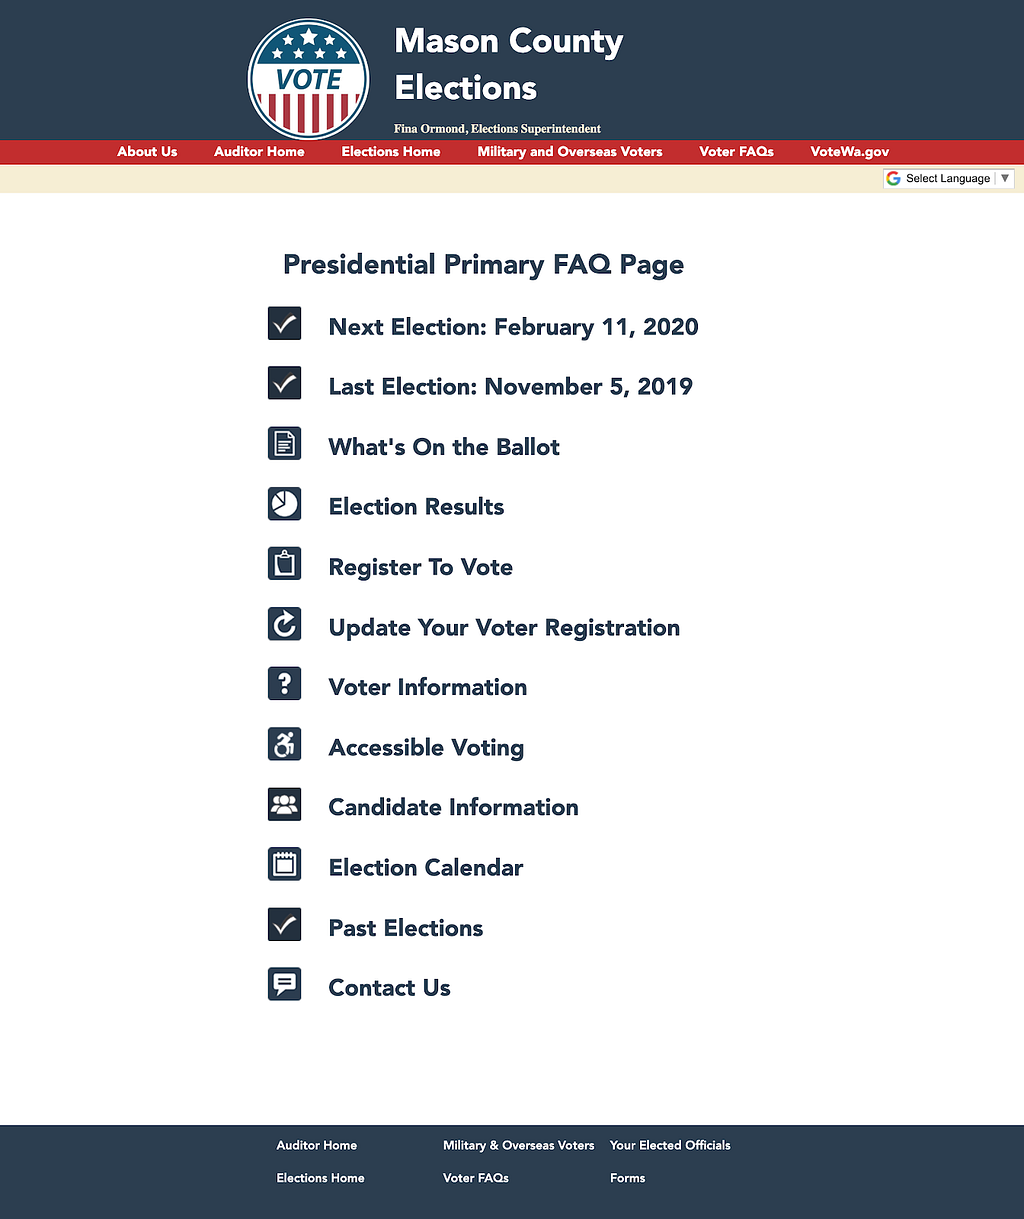 Screen capture that shows navigation links labeled to answer voters’ questions